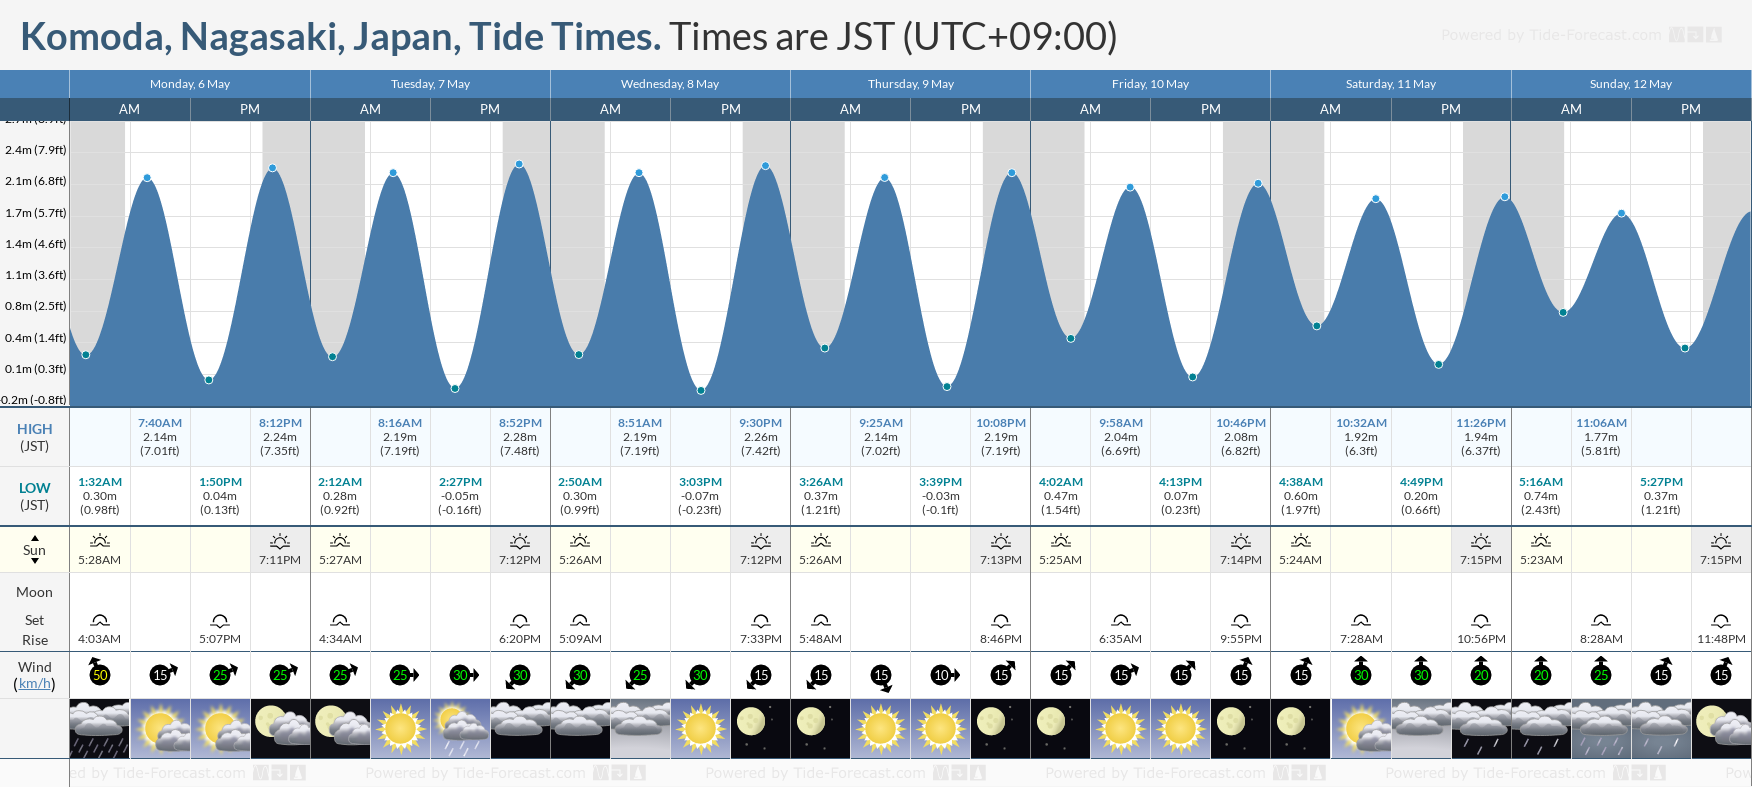 Komoda, Nagasaki, Japan Tide Chart including high and low tide tide times for the next 7 days